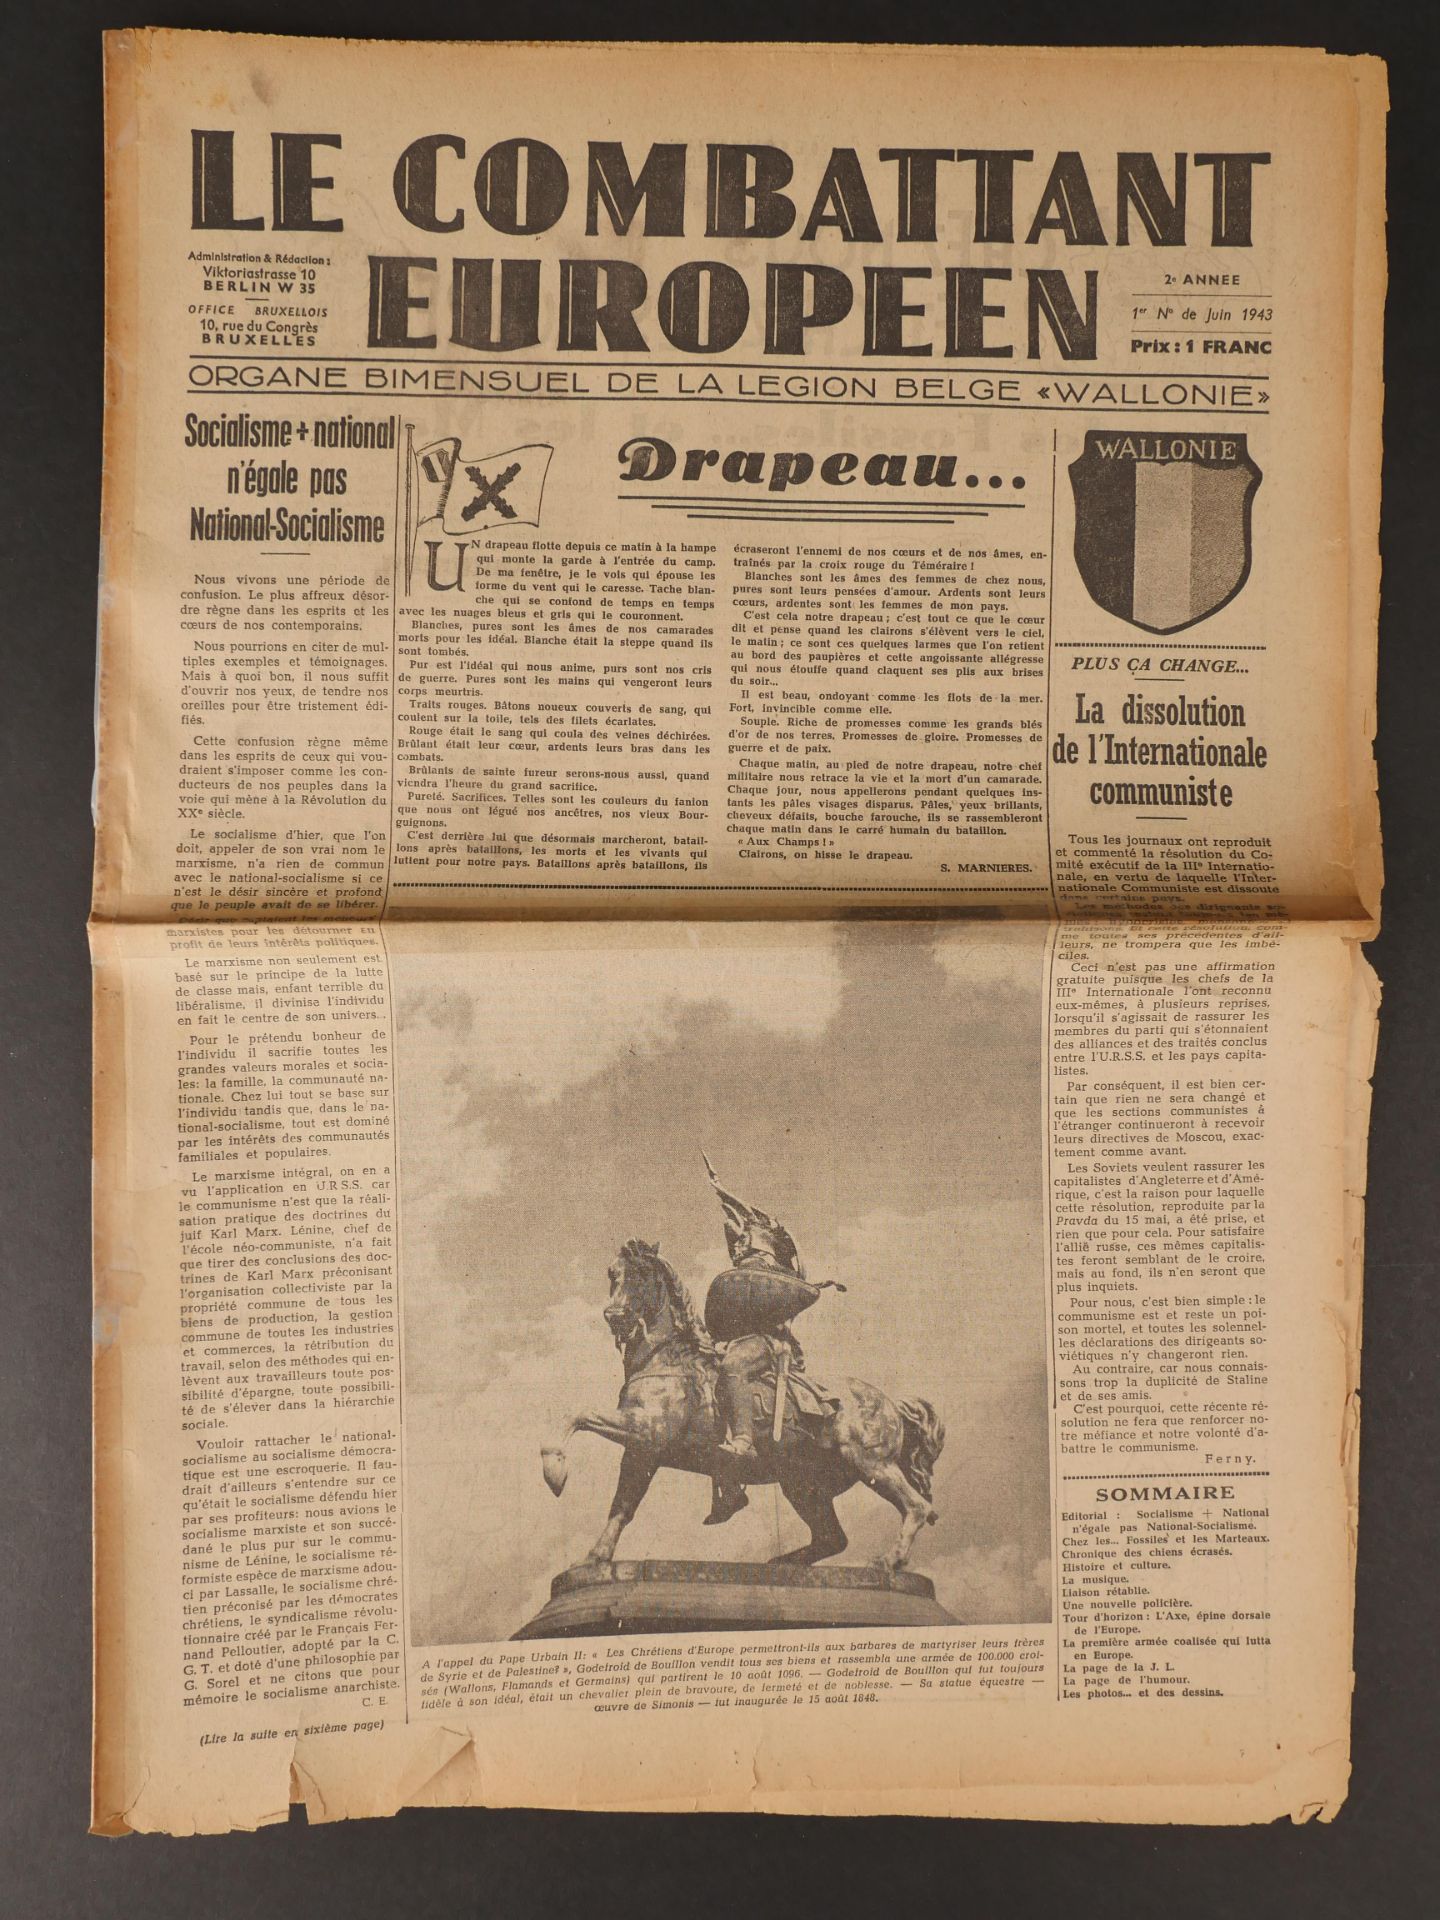 Journal le Combattant Europeen. Newspapers The European Fighter.